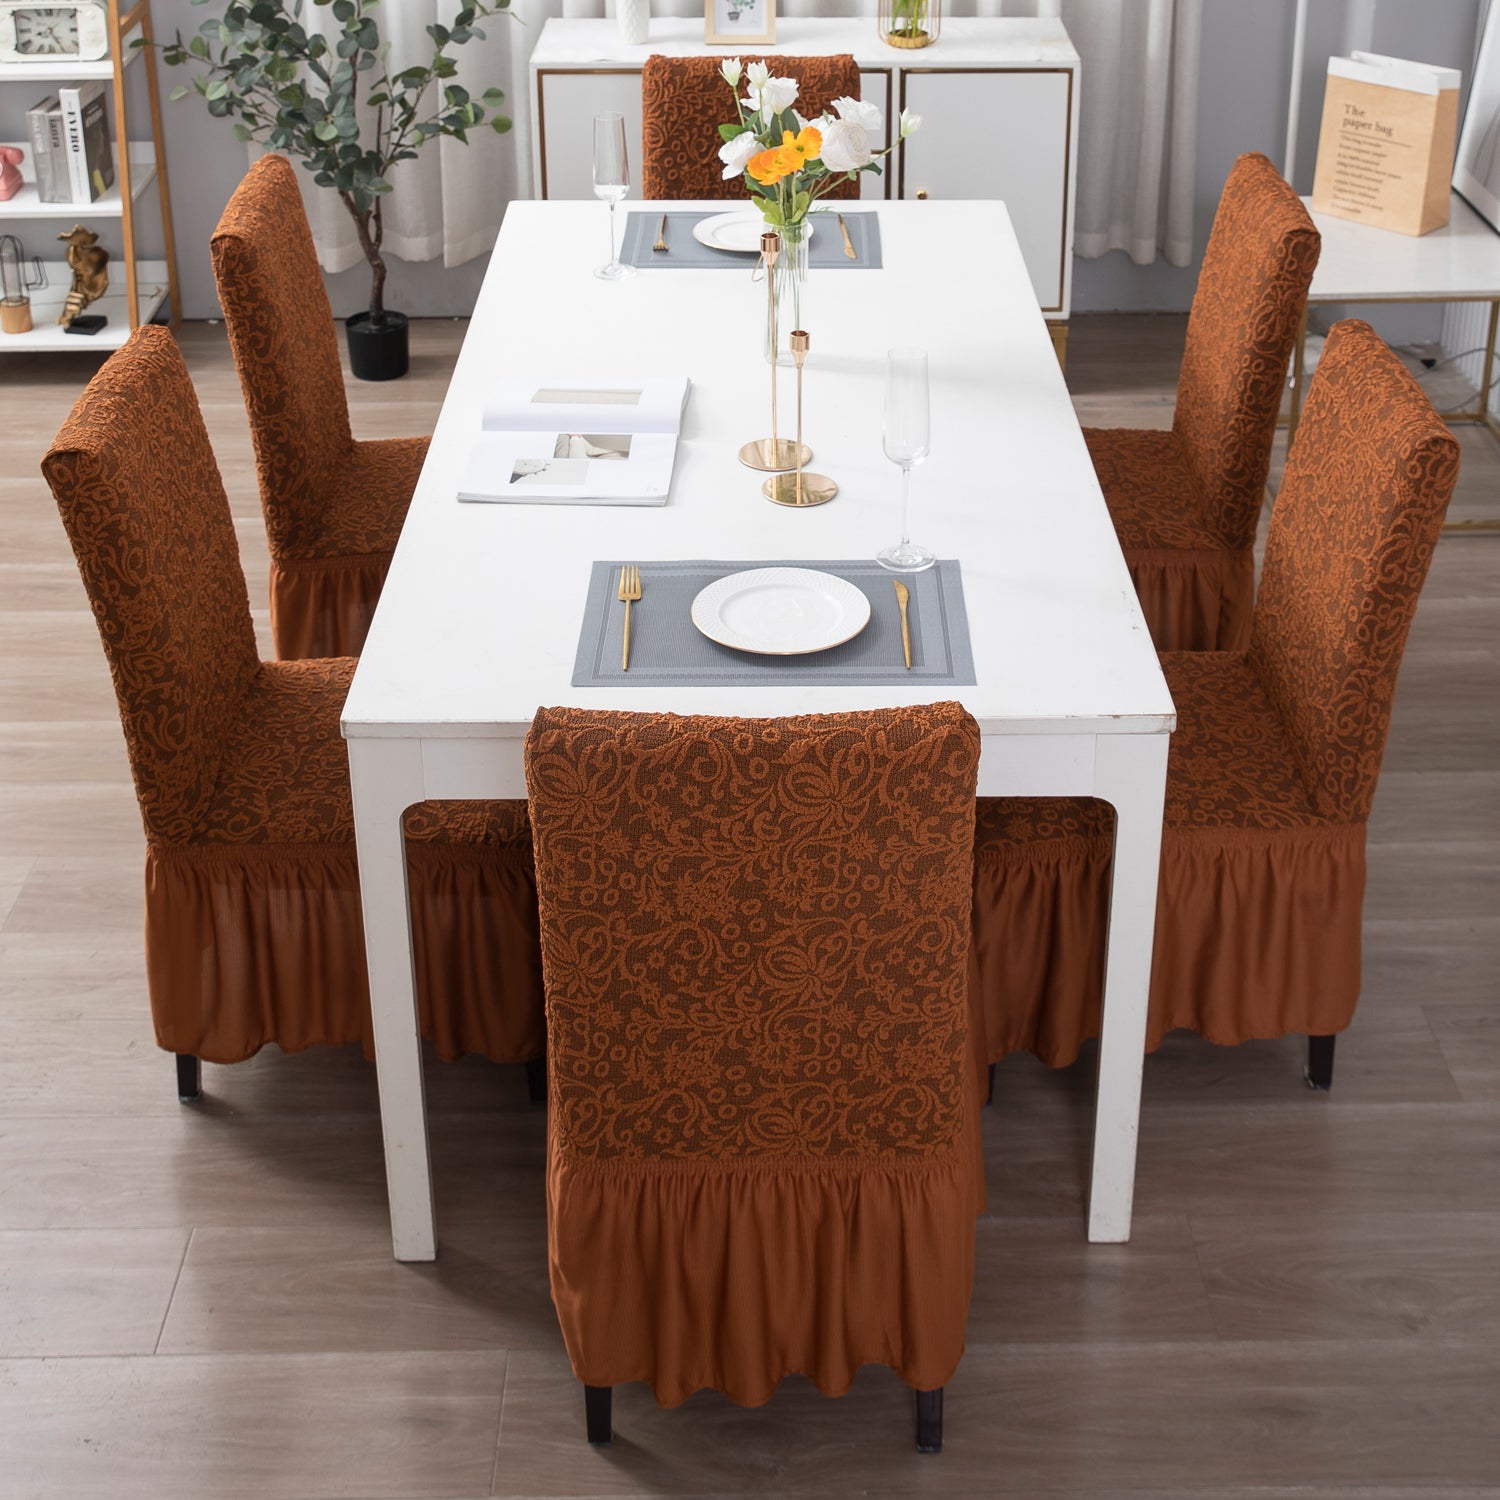 Elastic Stretchable Designer Woven Jacquard Dining Chair Cover with Frill, Caramel Brown